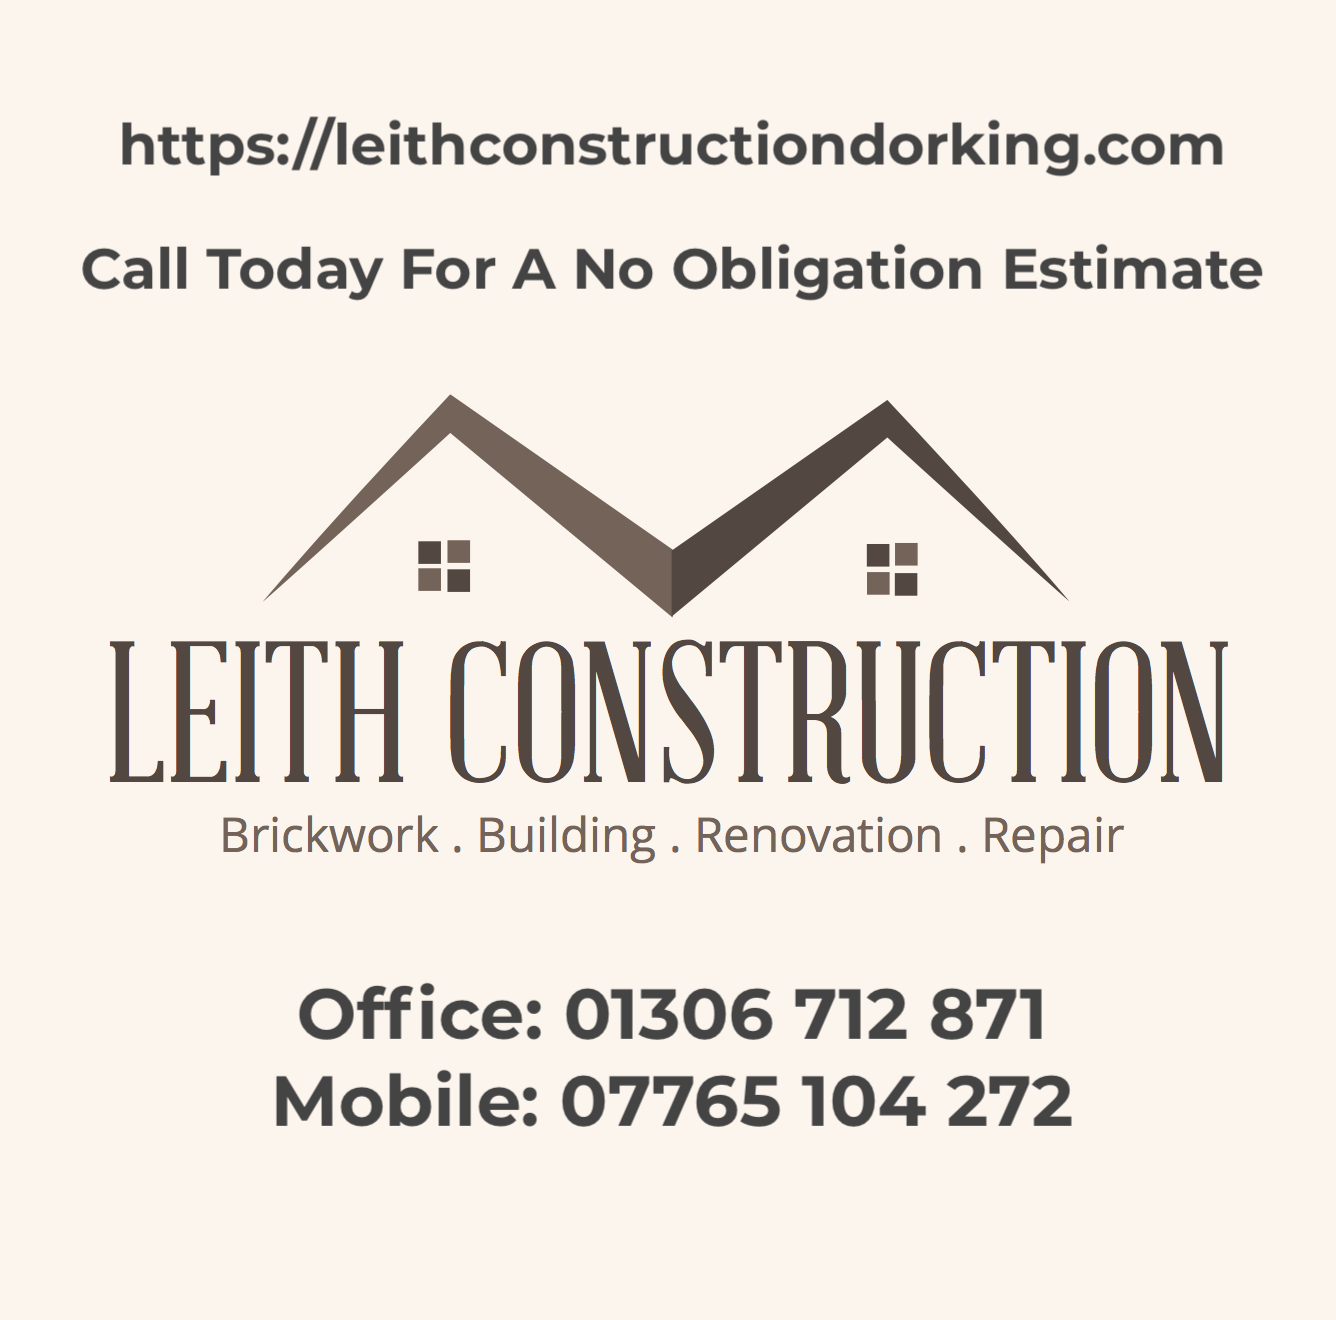 Leith Construction Contact and Location Information - Dorking Builder and Bricklayer - Builder Landscaper Leith Construction Dorking Horsahm Surrey West Sussex Geographical - Where we work - Areas Covered - Repair and Refurbishment Services - Builder and Bricklayer in Horsham